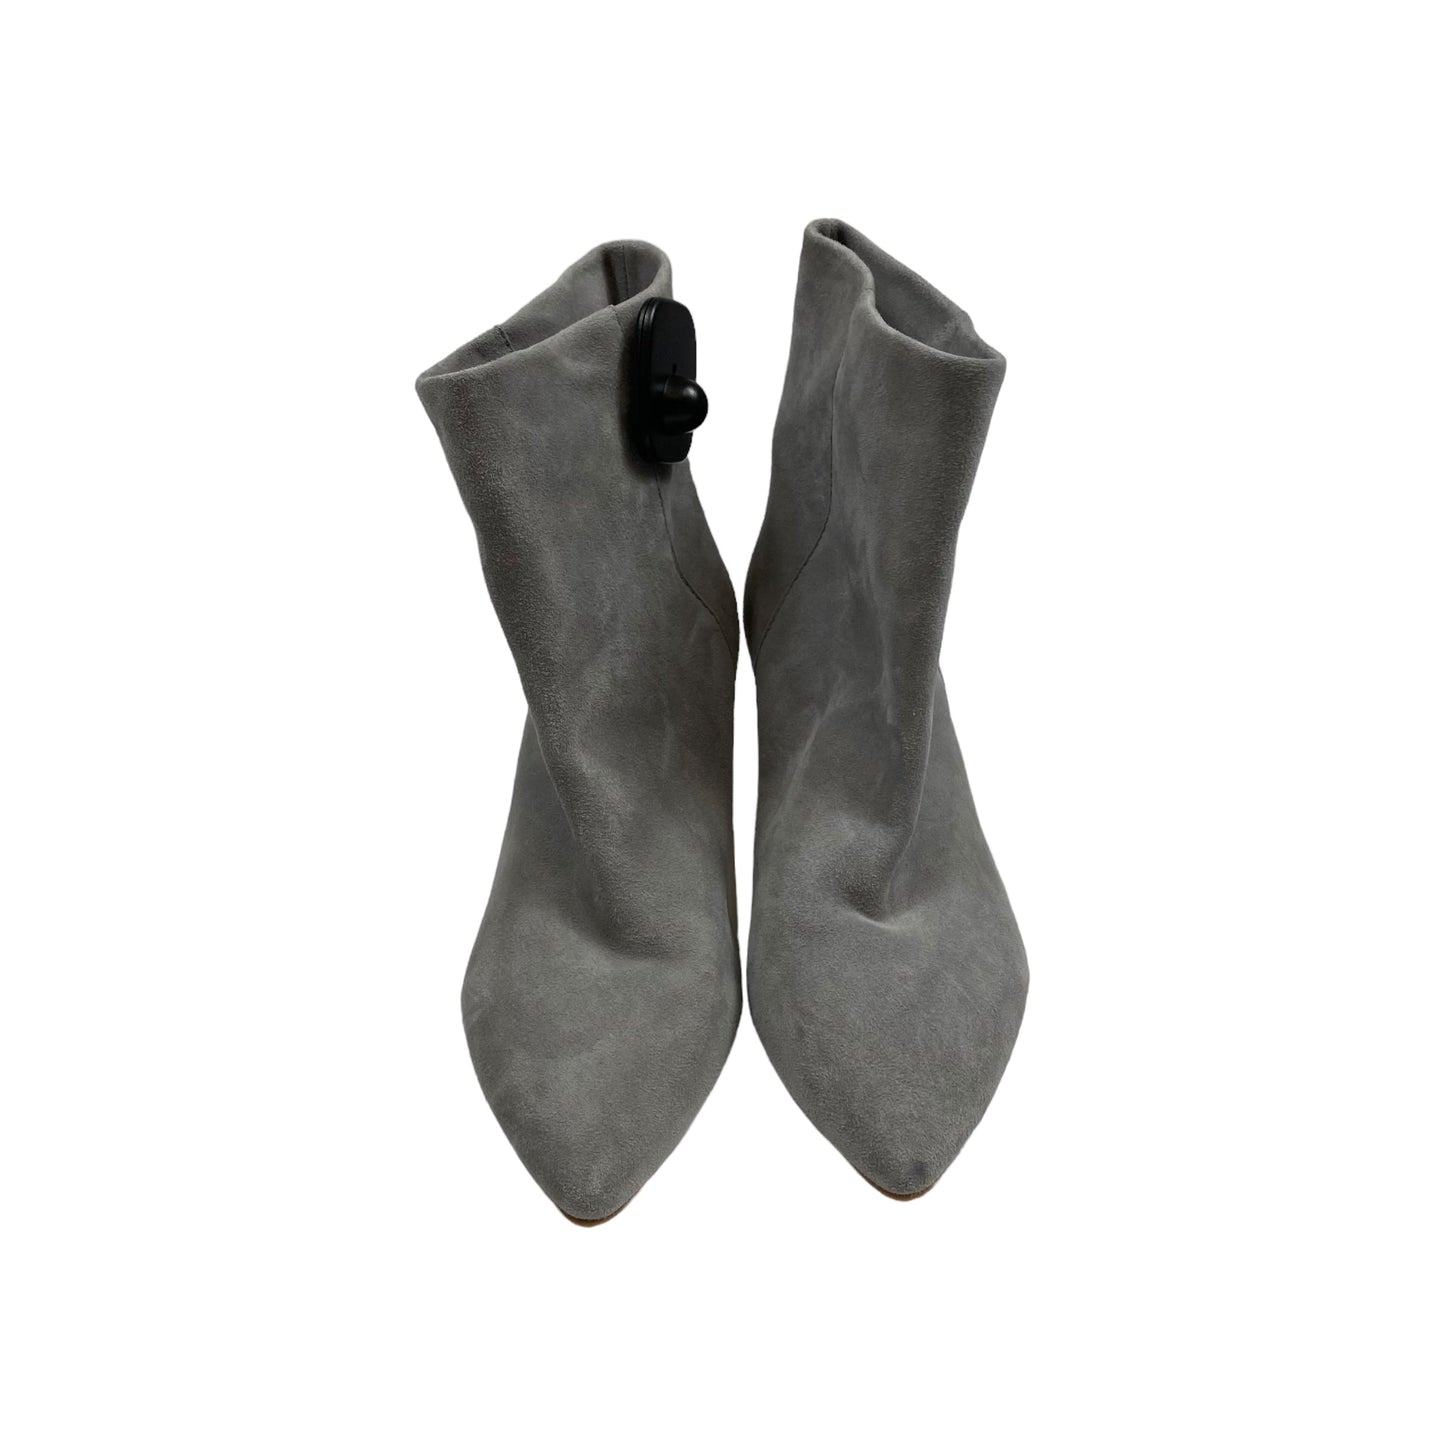 Boots Ankle Heels By Dolce Vita  Size: 6.5